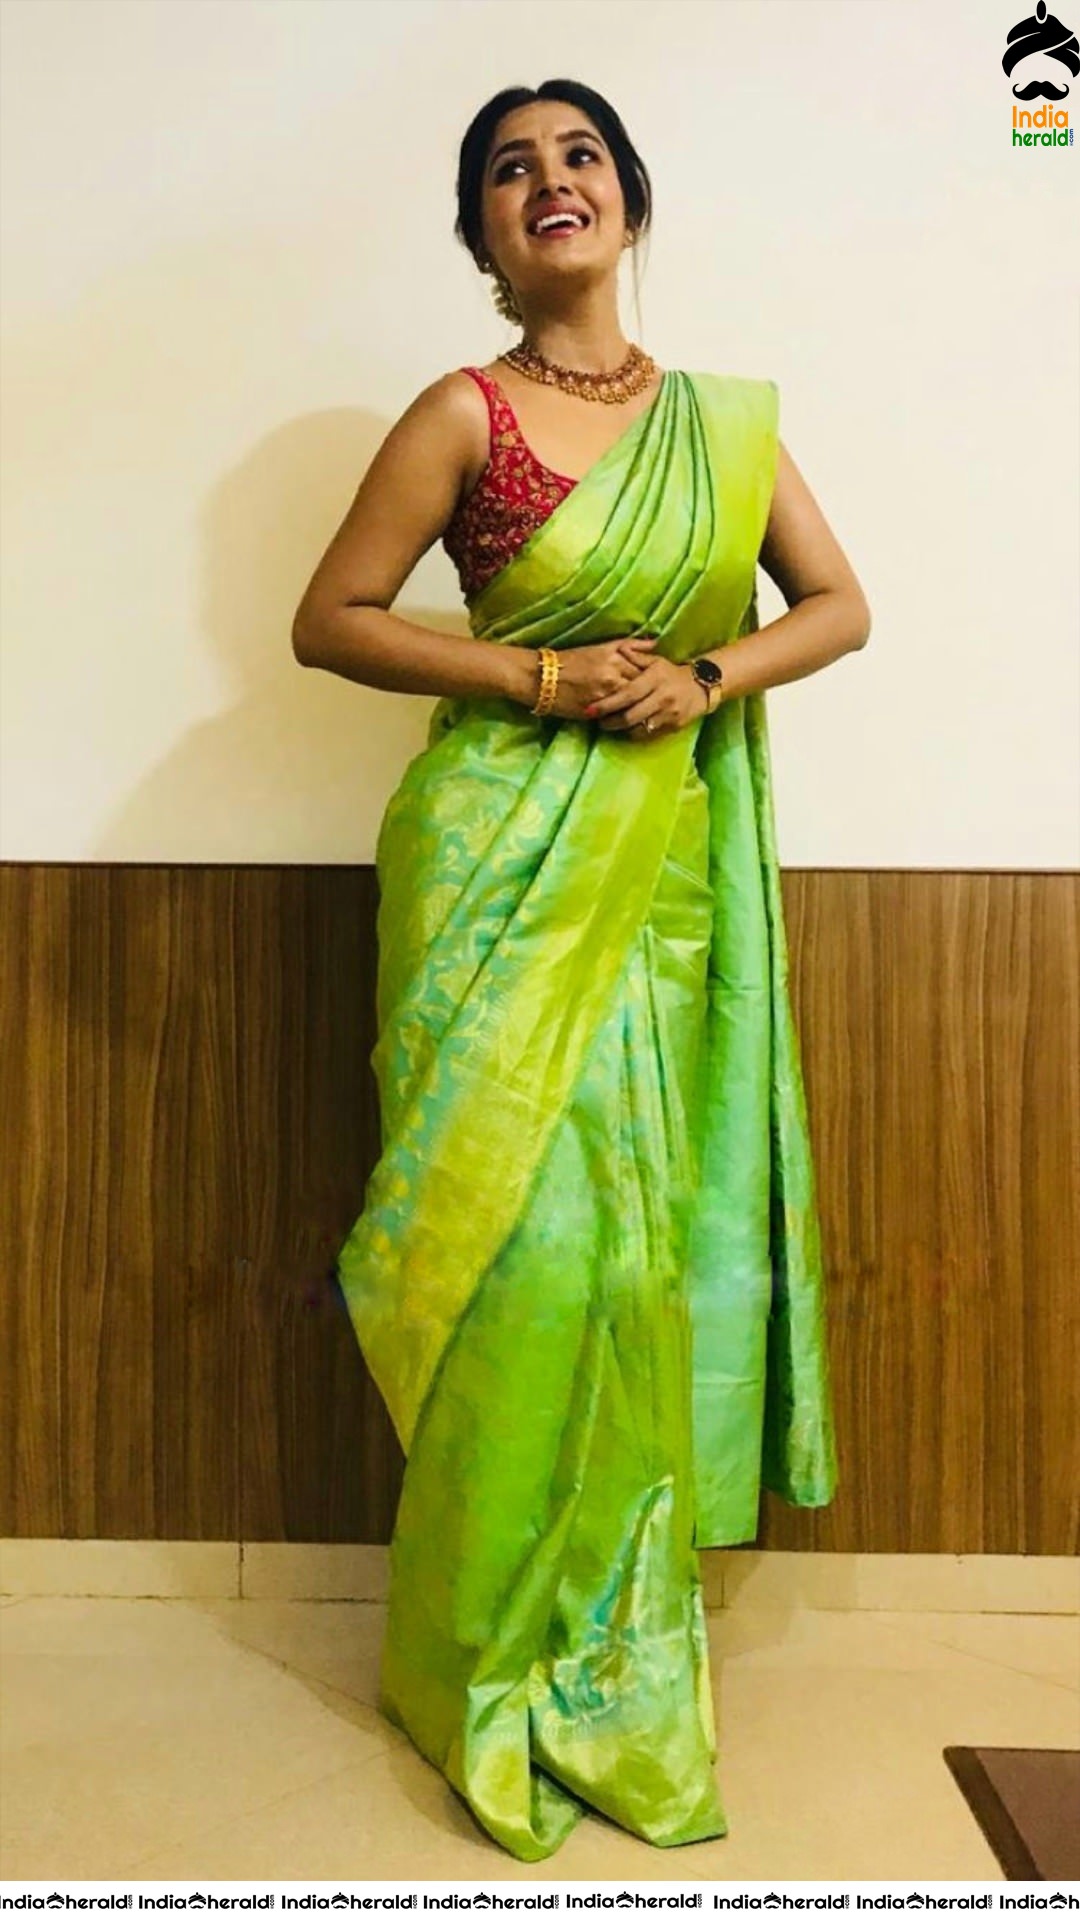 Vani Bhojan looking Vivacious and Sexy in these Hot Saree and Backless Blouse photos